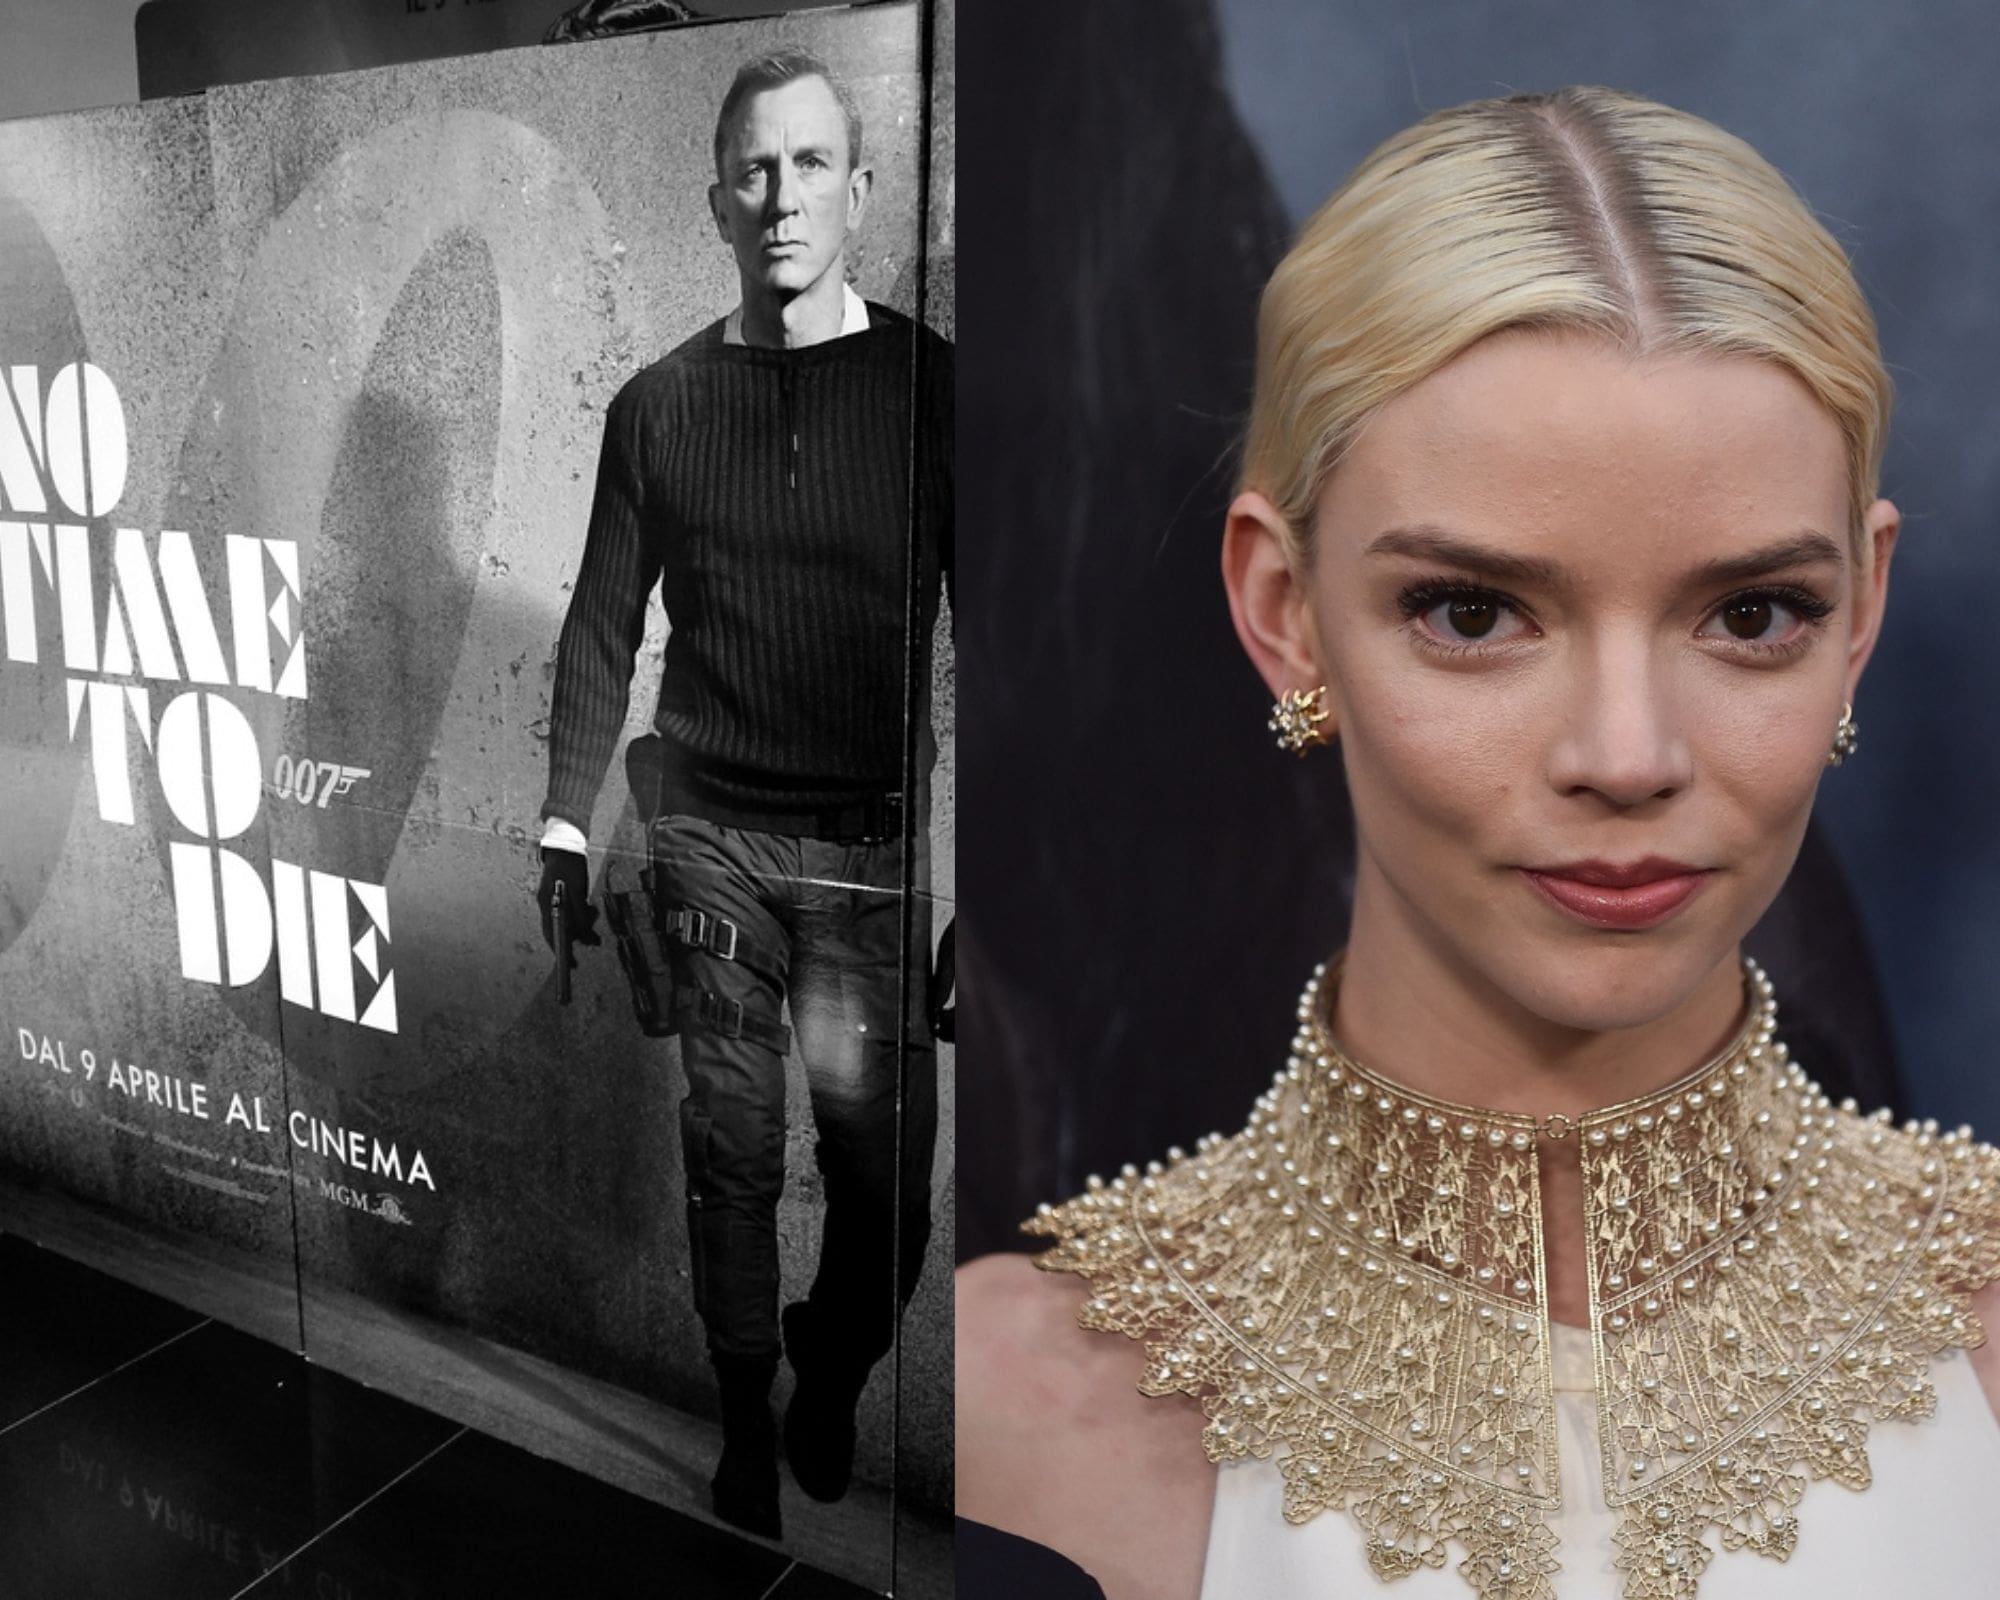 007 Fans Are Officially Confused. Is Anya Taylor-Joy Set To Play The Next Bond?